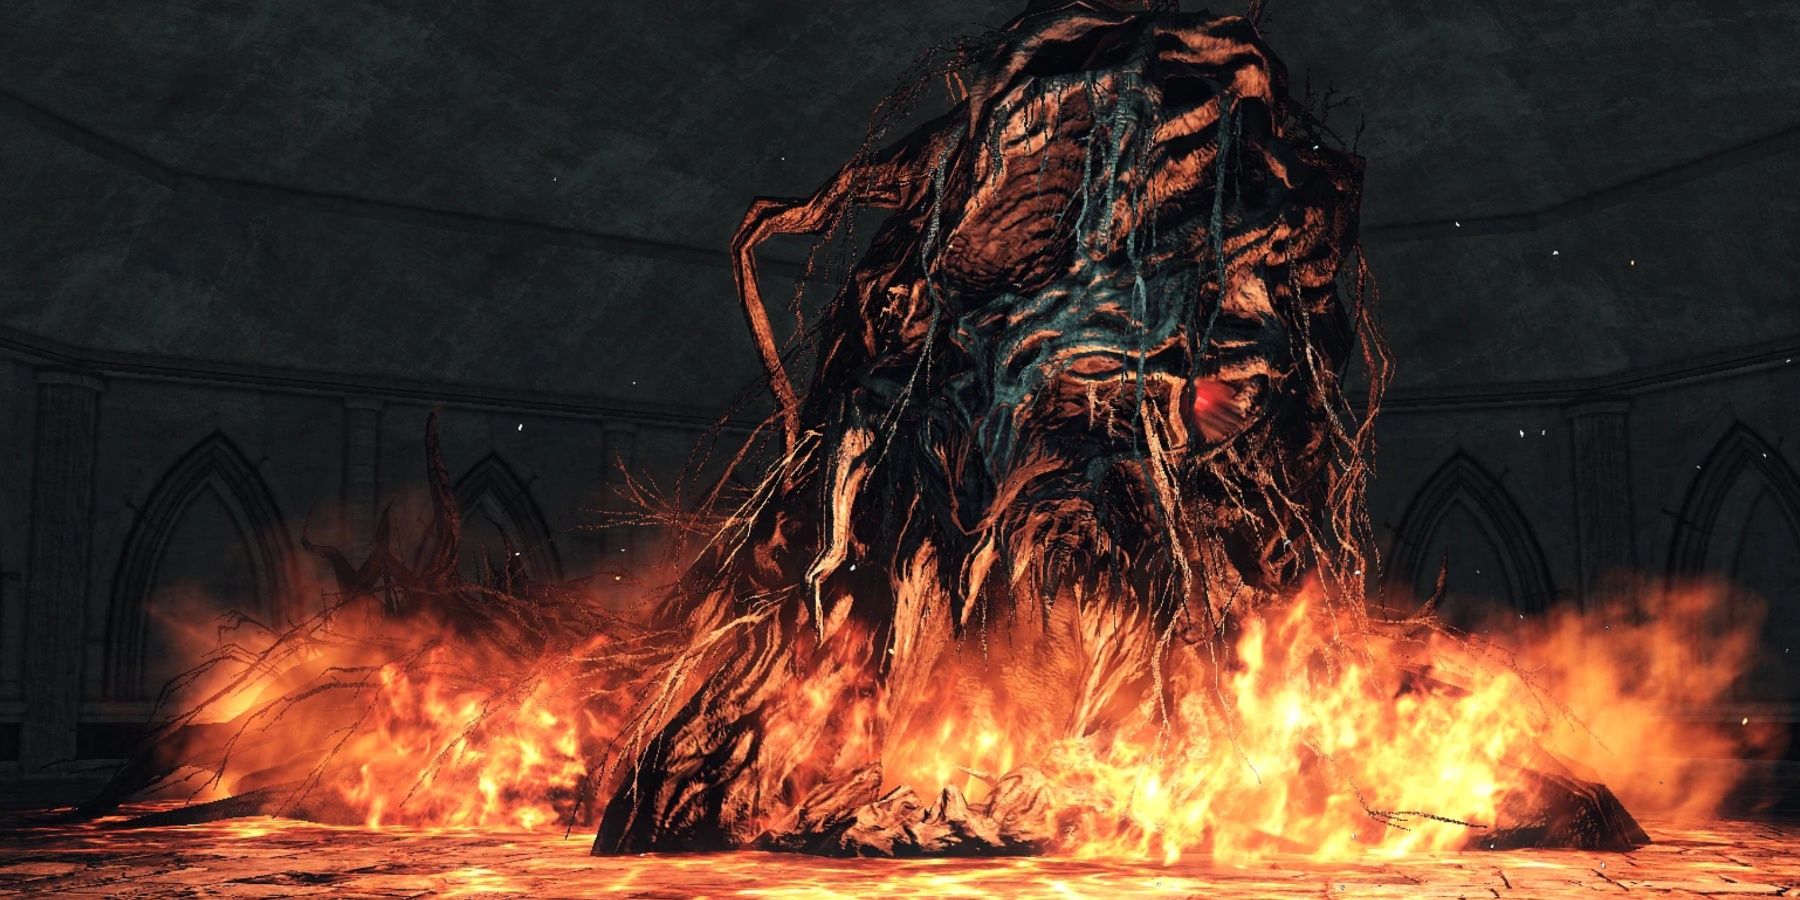 Dark Souls 2 Aldia surrounded by fire